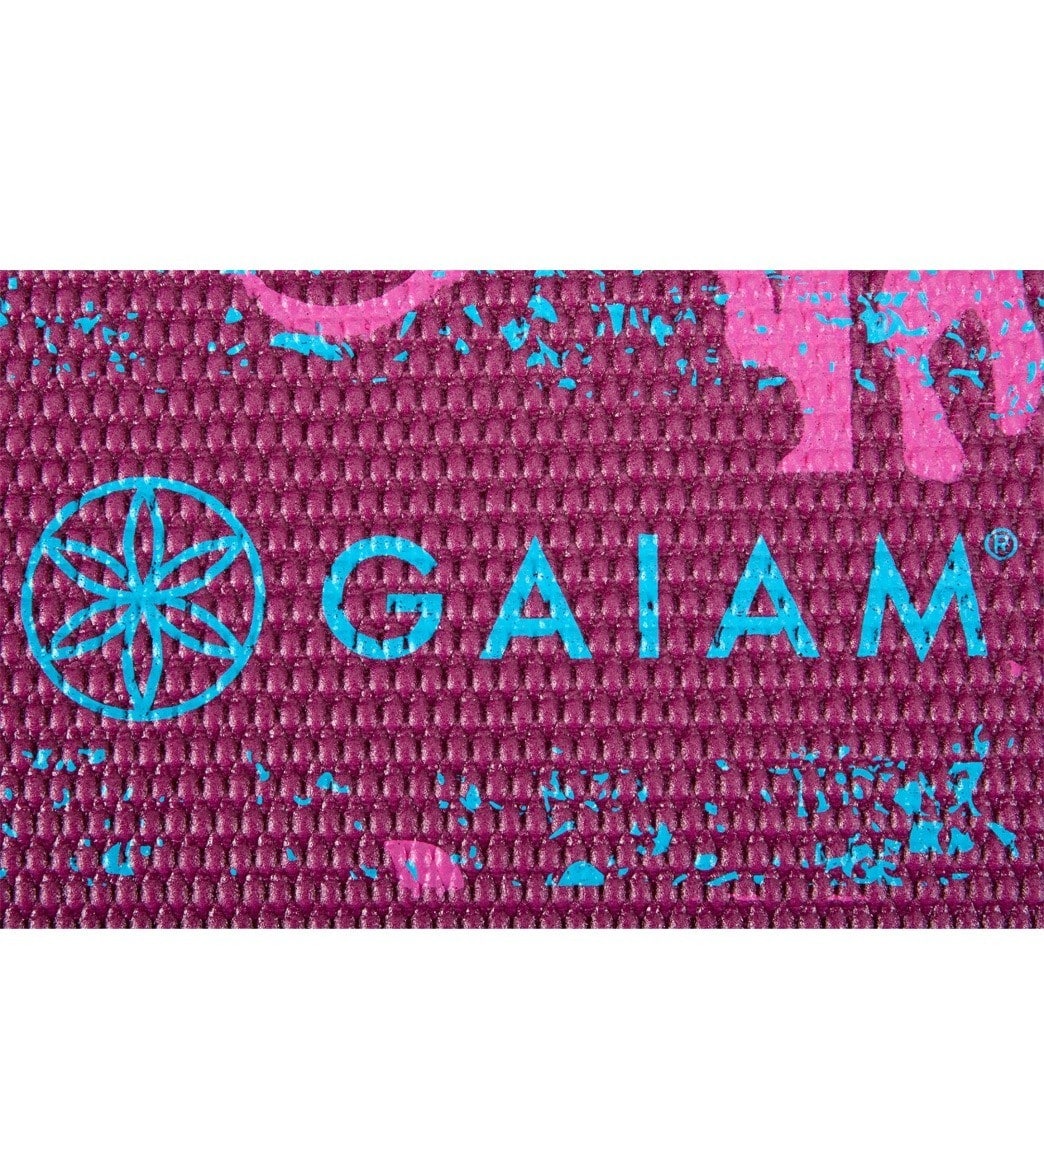 Gaiam Reversible Be Free Printed Yoga Mat 68 6mm Extra Thick